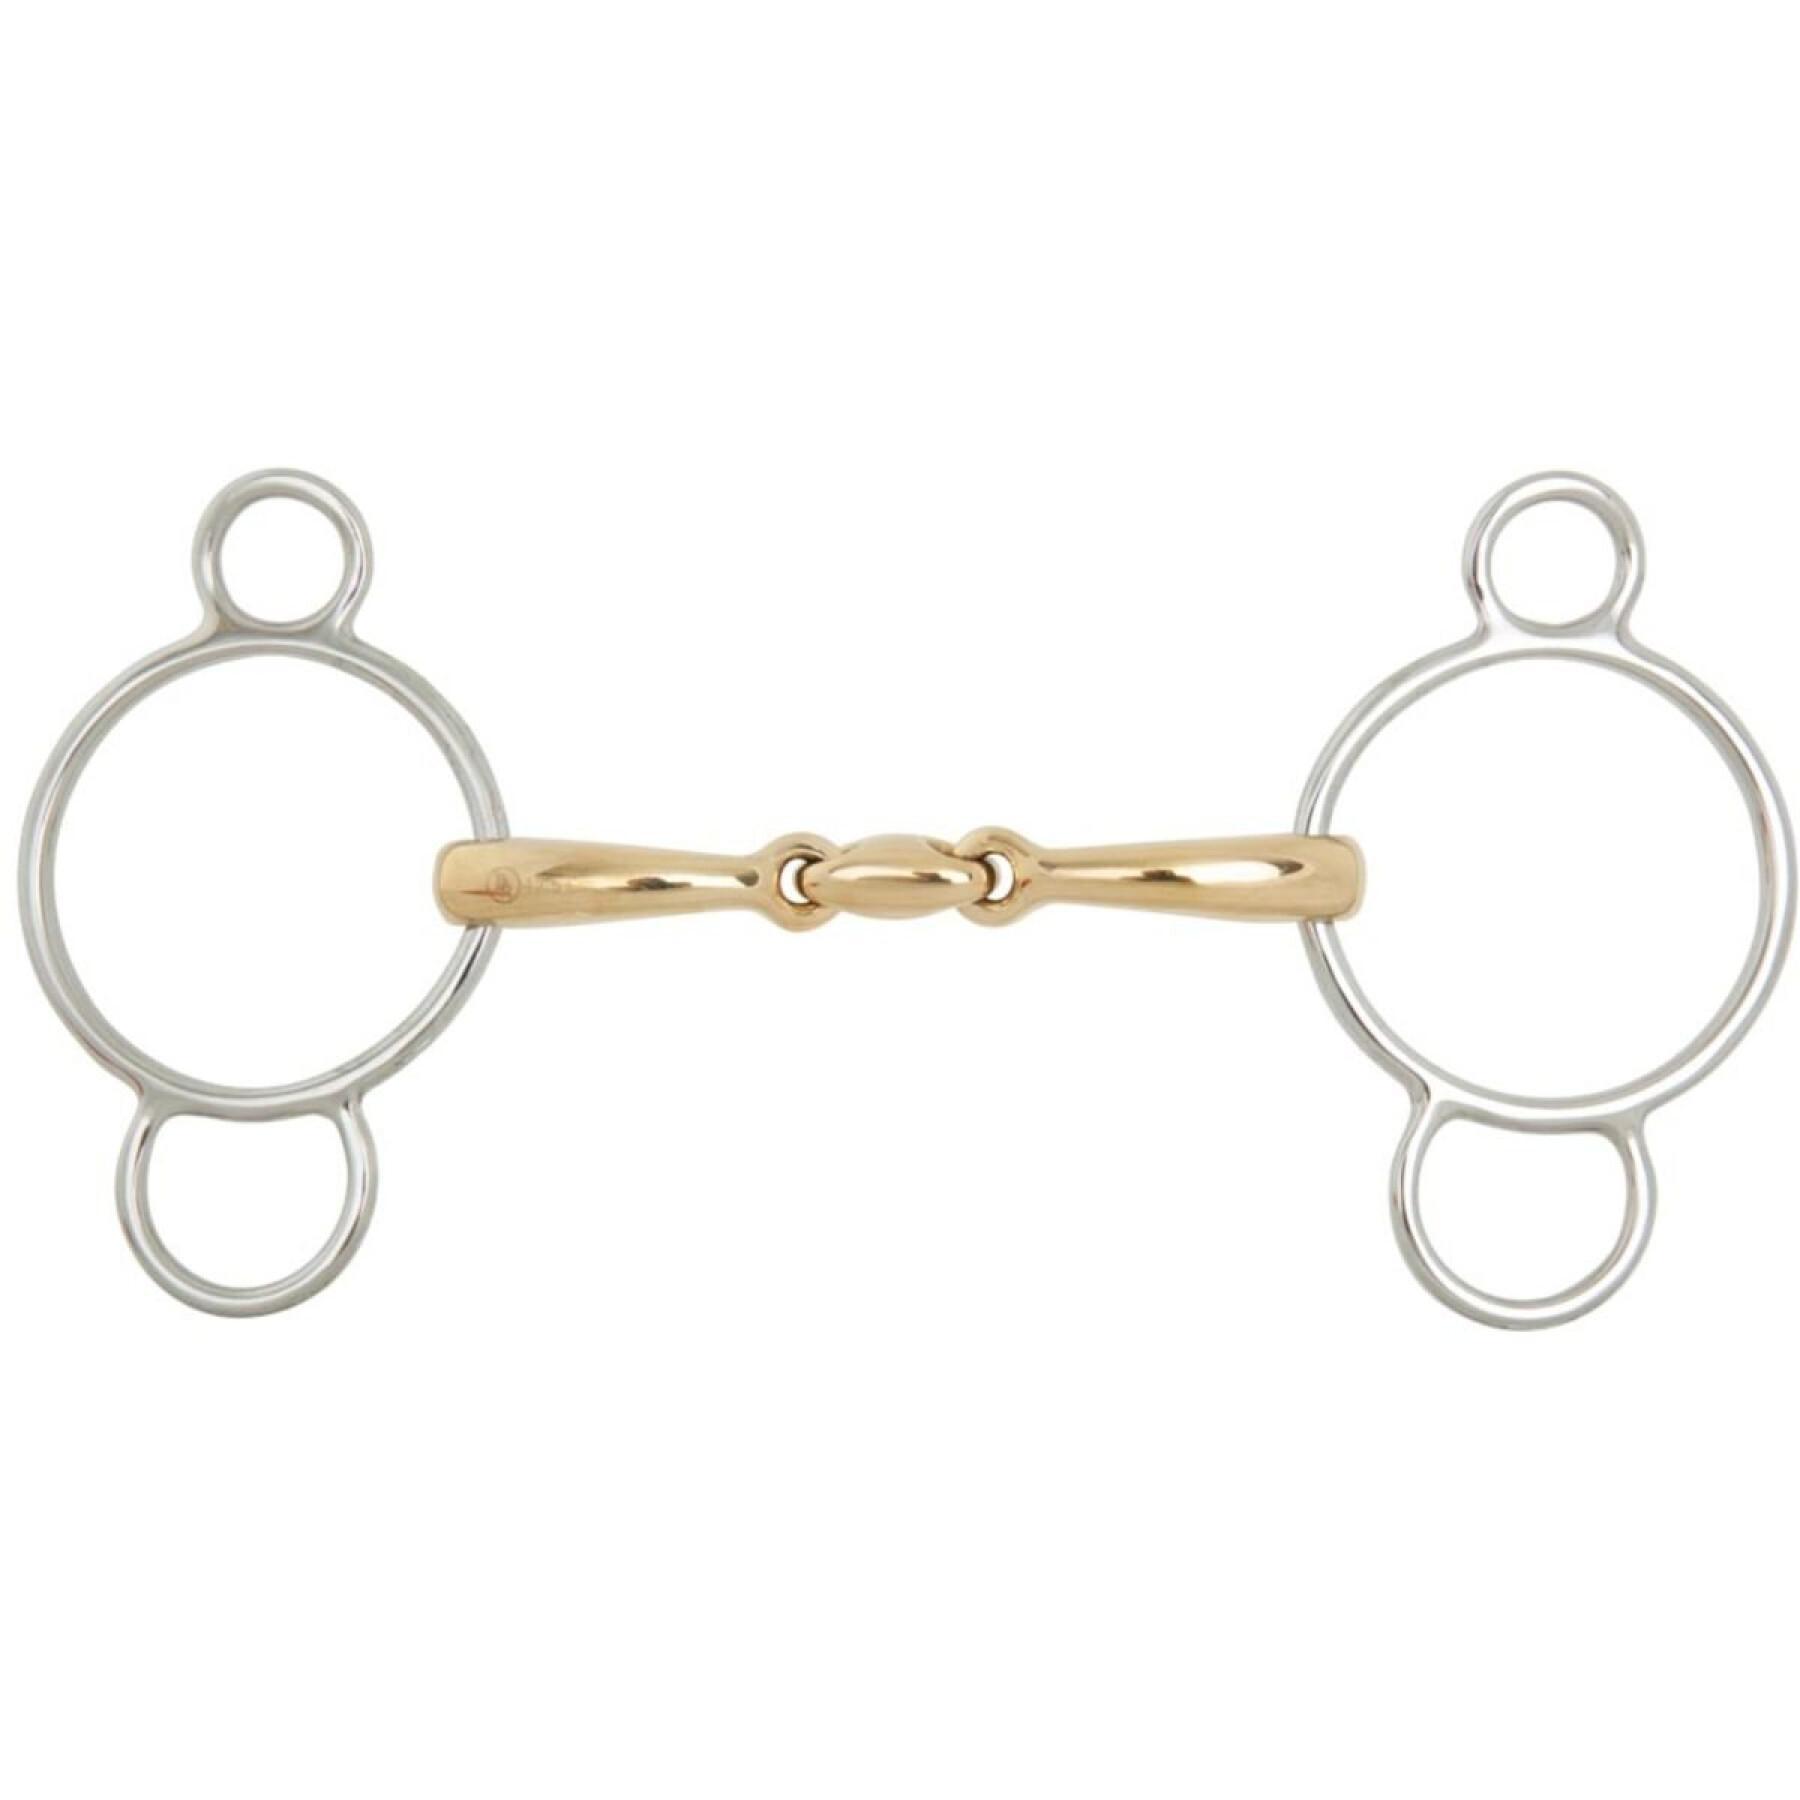 3-Ring Gebiss BR Equitation Soft Contact